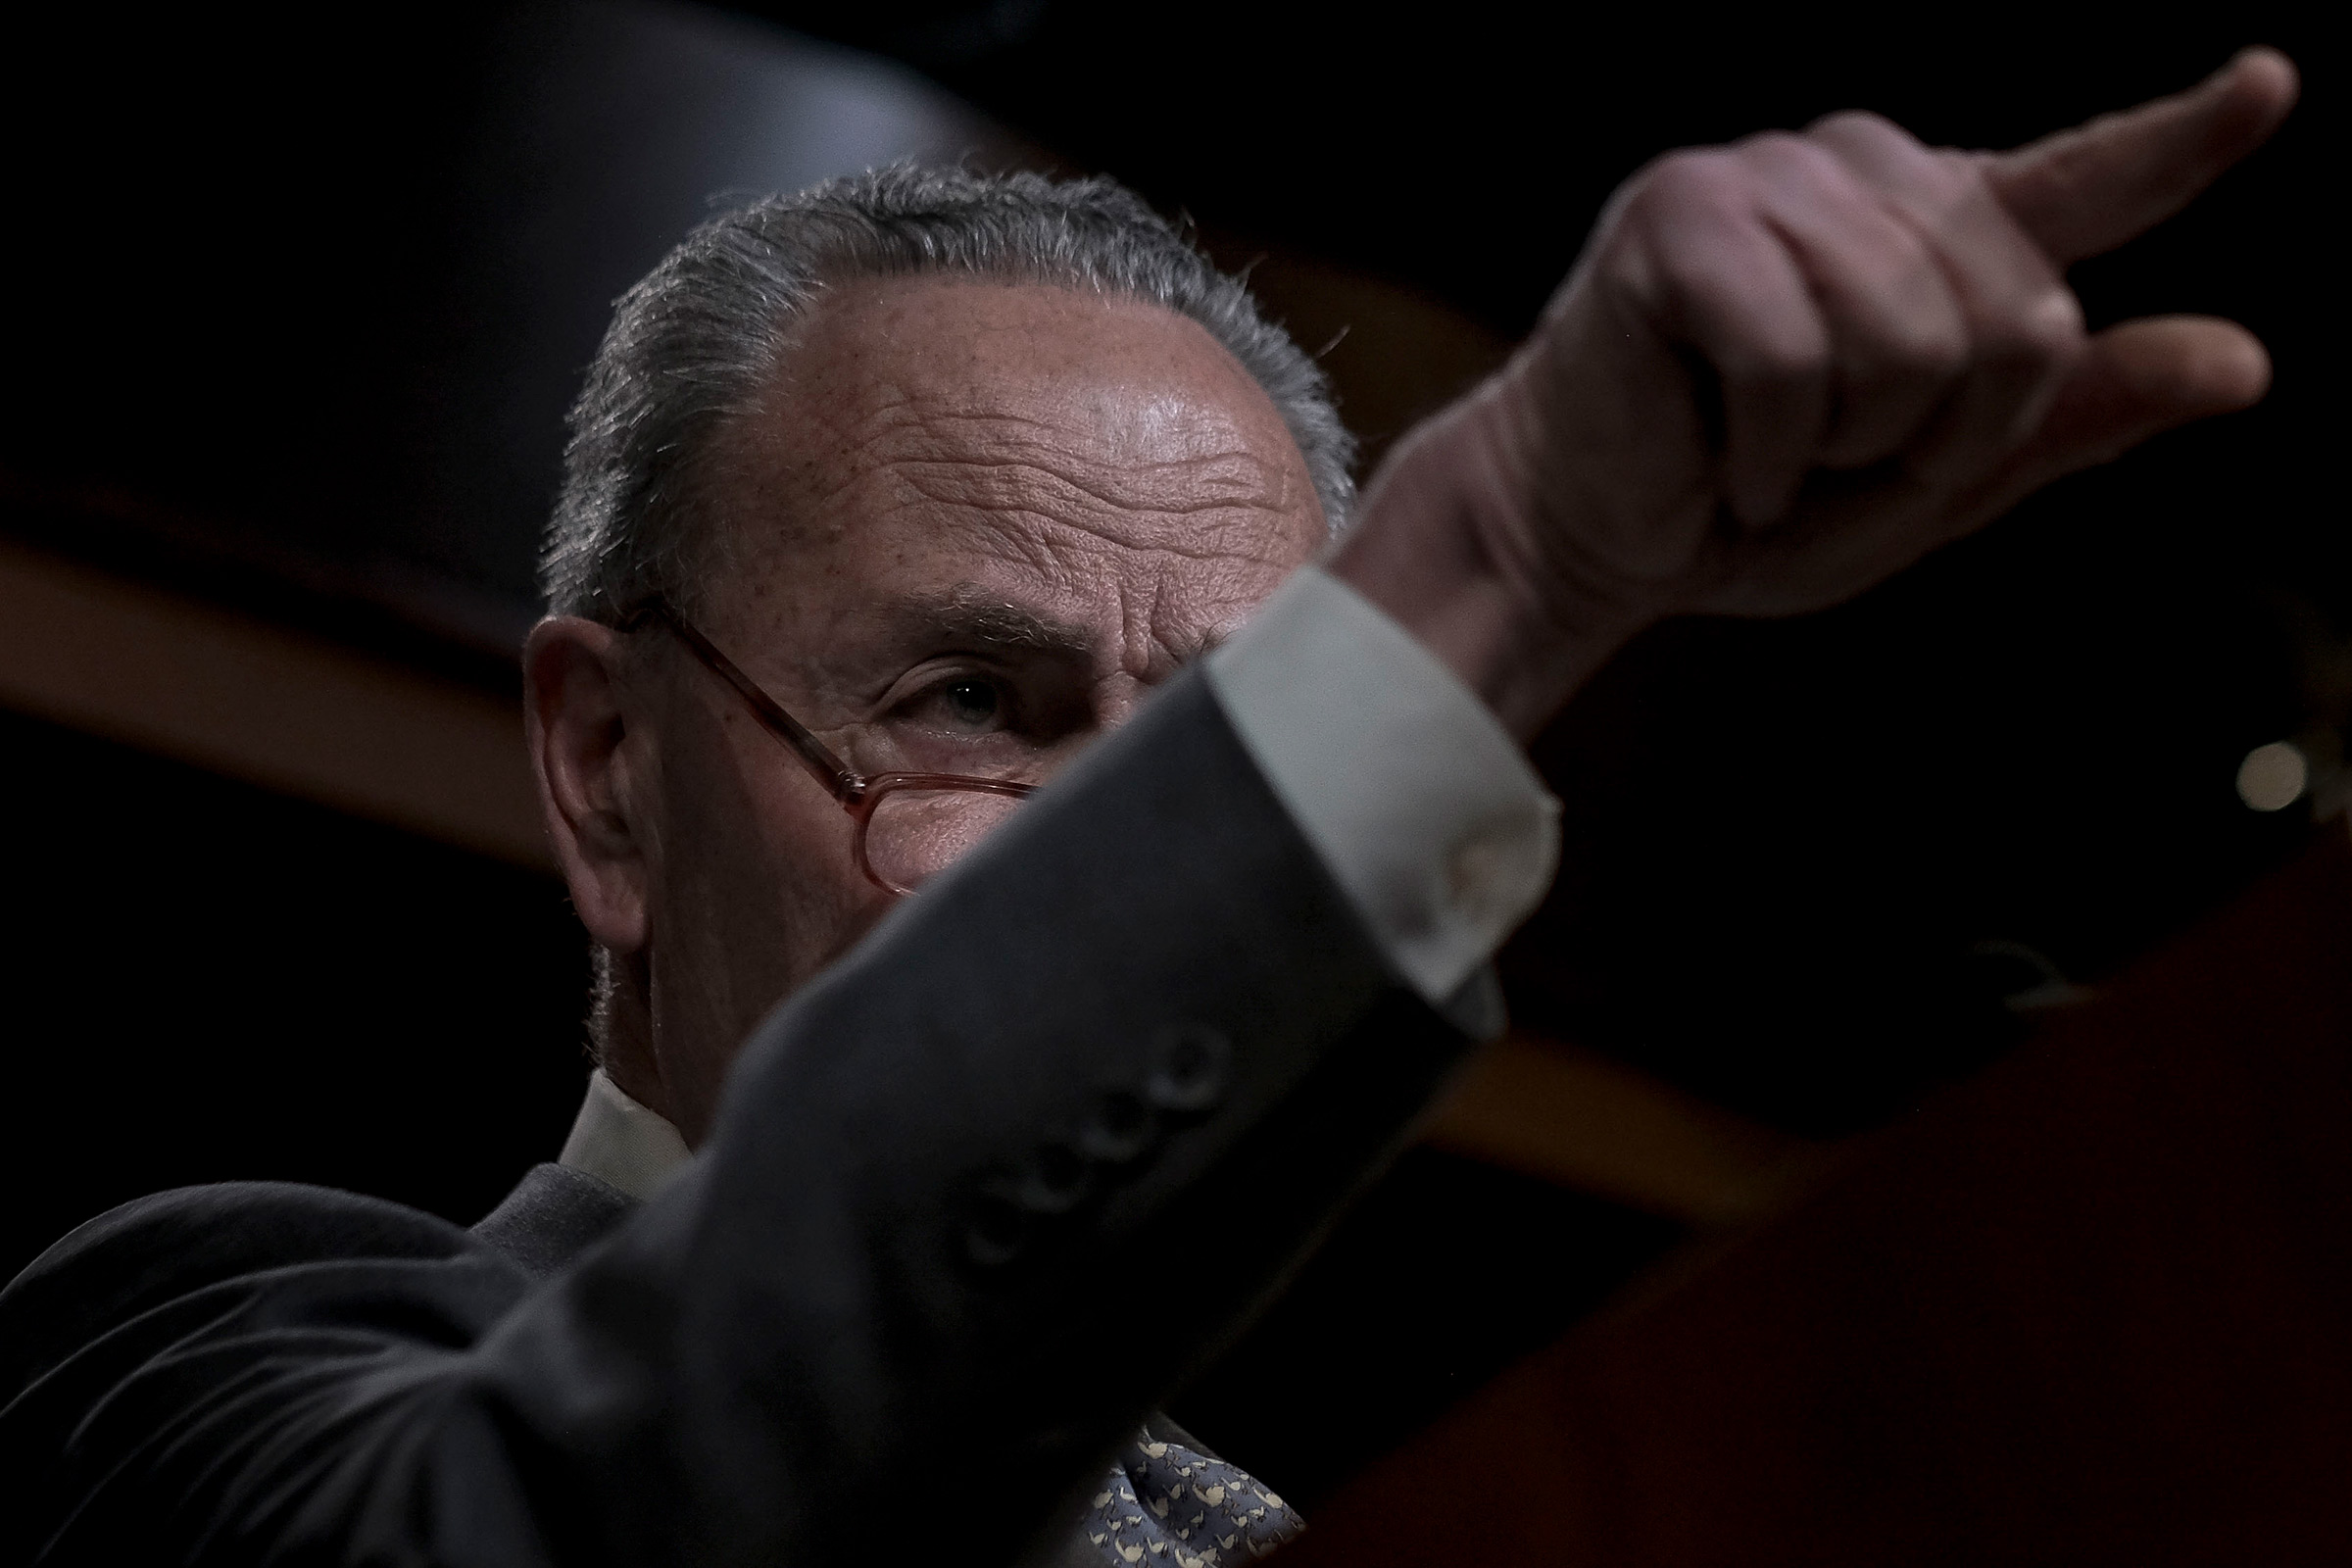 Senate Minority Leader Chuck Schumer (D-N.Y.) speaks to reporters at a press conference at the Capitol in Washington, D.C. on Jan. 27, 2020. Gabriella Demczuk / TIME (Gabriella Demczuk for TIME)